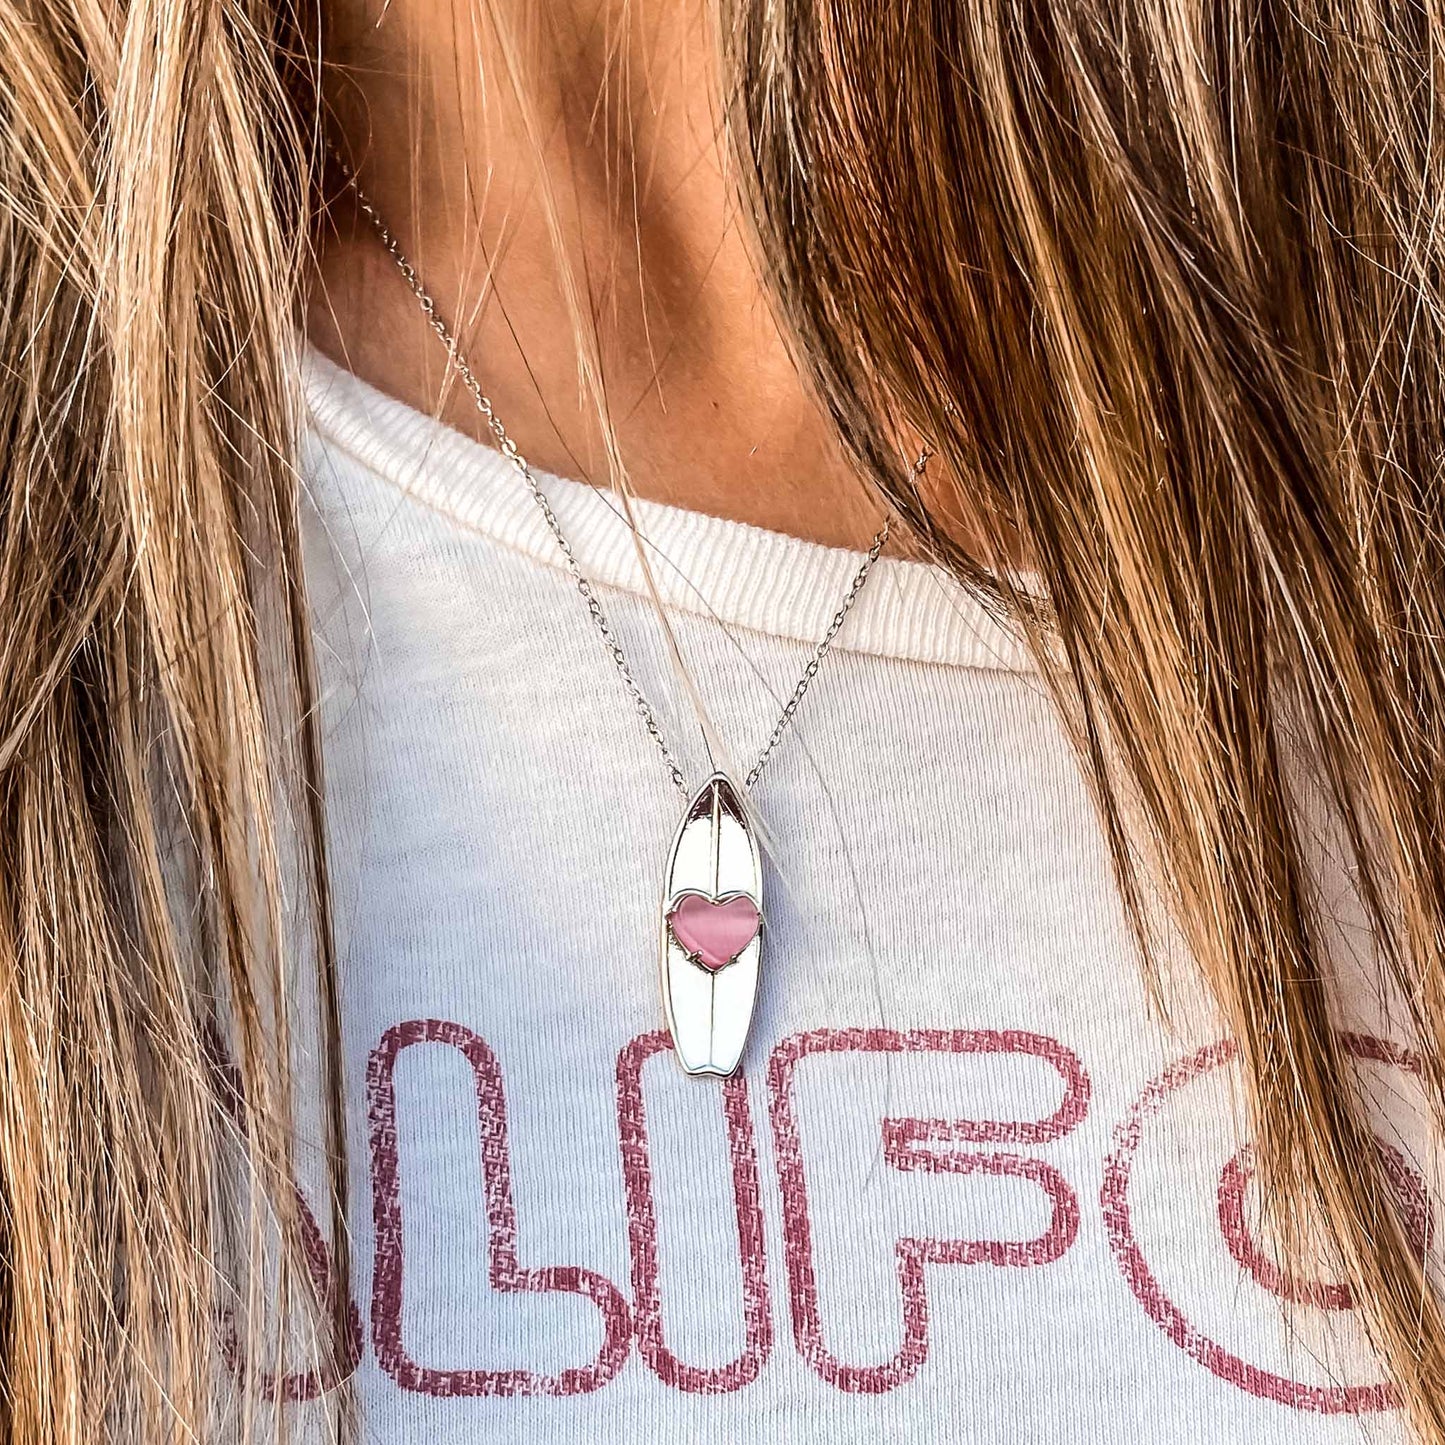 What's the surf forecast for today? While Surfline helps with the swell, wind & wave forecasts we help you show off your passion for surfing. Whether you're surfing or just checking the waves at Pipeline, take your surfboard, always. Shop the October birthstone surf jewelry online or at a surf shop near you.